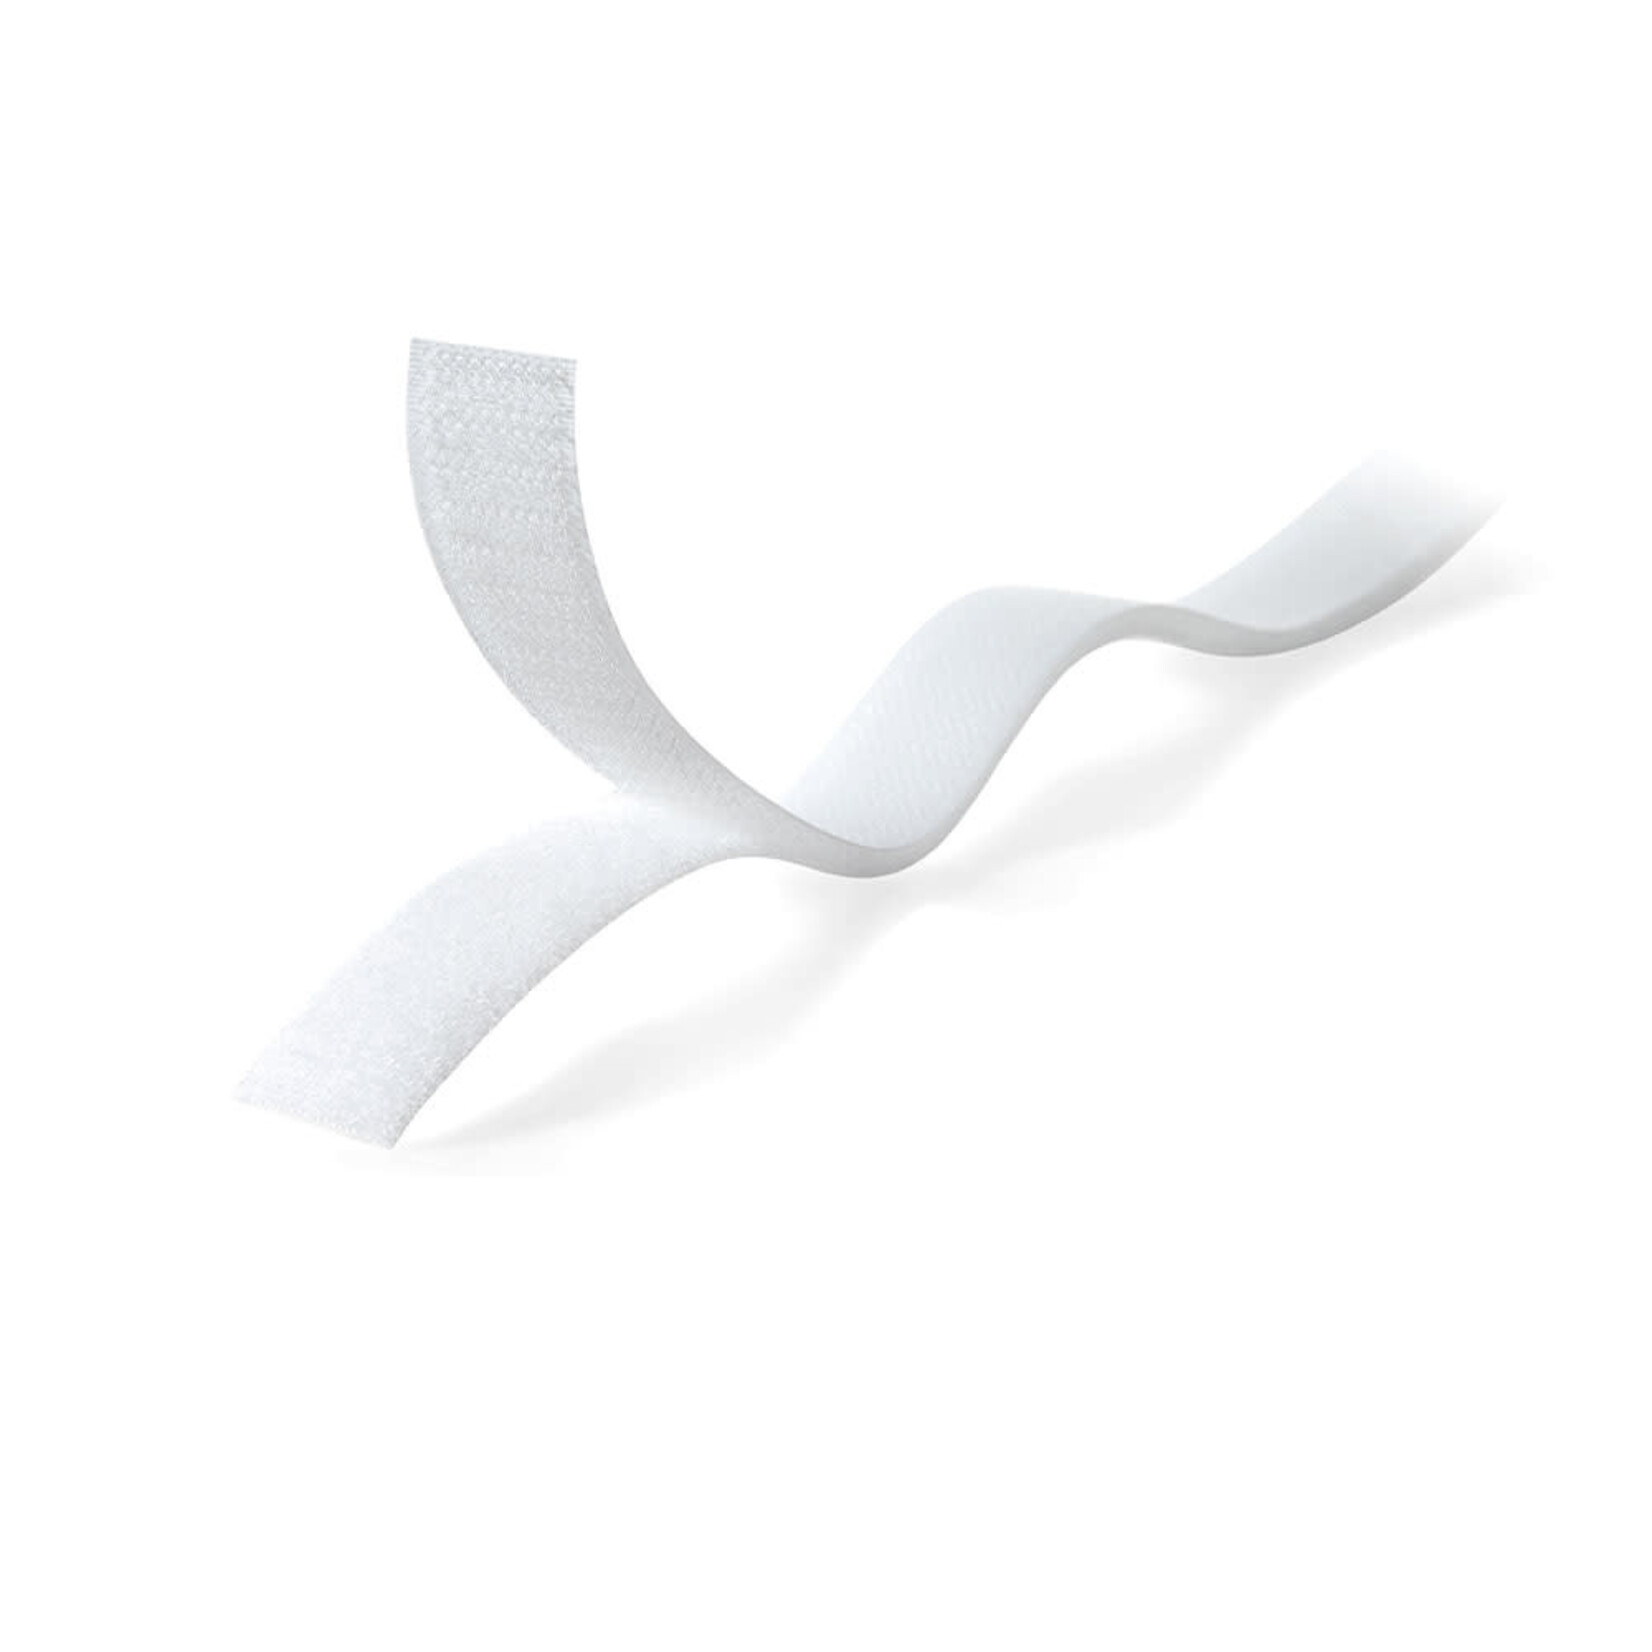 Uline Velcro 1" White Adhesive Backed By The Foot